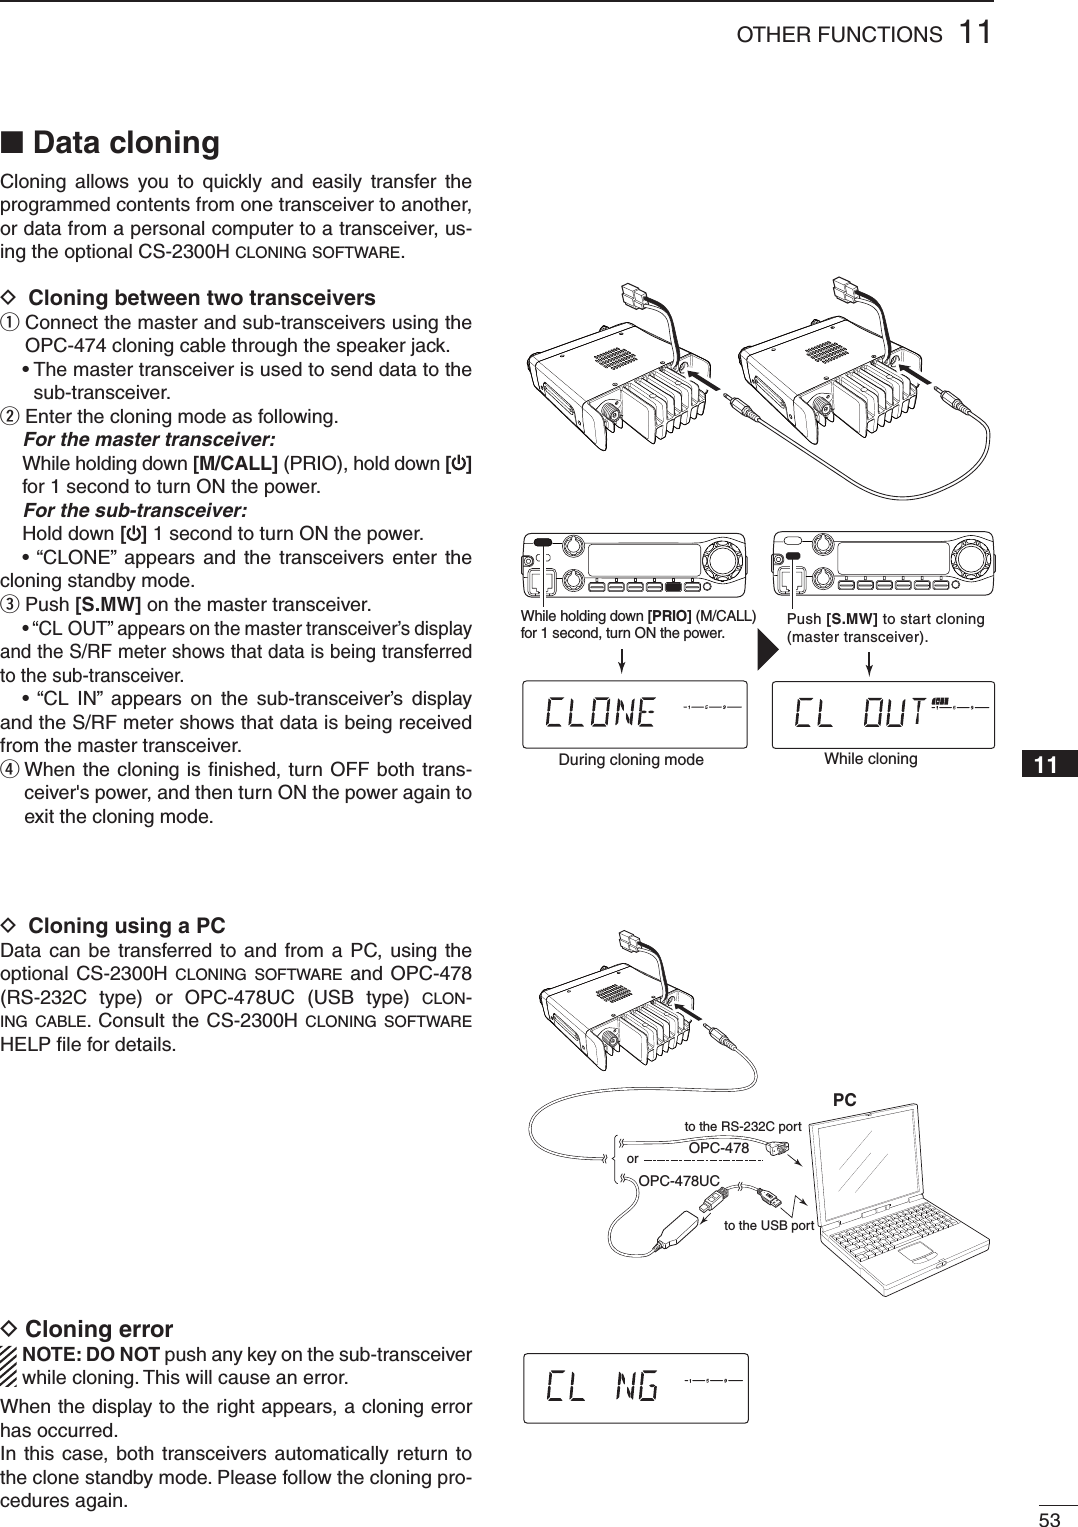 5311OTHER FUNCTIONS■ Data cloningCloning allows you to quickly and easily transfer the programmed contents from one transceiver to another, or data from a personal computer to a transceiver, us-ing the optional CS-2300H CLONING SOFTWARE.D Cloning between two transceiversq  Connect the master and sub-transceivers using the OPC-474 cloning cable through the speaker jack. •  The master transceiver is used to send data to the sub-transceiver.w  Enter the cloning mode as following.  For the master transceiver:  While holding down [M/CALL] (PRIO), hold down [] for 1 second to turn ON the power.  For the sub-transceiver: Hold down [] 1 second to turn ON the power.  • “CLONE” appears and the transceivers enter the cloning standby mode.e  Push [S.MW] on the master transceiver.  • “CL OUT” appears on the master transceiver’s display and the S/RF meter shows that data is being transferred to the sub-transceiver.  • “CL IN” appears on the sub-transceiver’s display and the S/RF meter shows that data is being received from the master transceiver.r  When the cloning is ﬁ nished, turn OFF both trans-ceiver&apos;s power, and then turn ON the power again to exit the cloning mode.D Cloning using a PCData can be transferred to and from a PC, using the optional CS-2300H CLONING SOFTWARE and OPC-478 (RS-232C type) or OPC-478UC (USB type) CLON-ING CABLE. Consult the CS-2300H CLONING SOFTWARE HELP ﬁ le for details.Cloning error D  NOTE: DO NOT push any key on the sub-transceiver while cloning. This will cause an error.When the display to the right appears, a cloning error has occurred.In this case, both transceivers automatically return to the clone standby mode. Please follow the cloning pro-cedures again.PCto the USB portto the RS-232C portOPC-478OPC-478UCorLOCKSETANMMONIDUPLOWT-SCANTONEPRIOM/CALLSCANV/MHzDIGITAL PRIO AO BUSYMUTENARMIDLOWPush [S.MW] to start cloning (master transceiver).While cloningLOCKSETANMMONIDUPLOWT-SCANTONEPRIOM/CALLSCANV/MHzDIGITAL PRIO AO BUSYMUTENARMIDLOWWhile holding down [PRIO] (M/CALL) for 1 second, turn ON the power.During cloning modeLOCKSETANMMONIDUPLOWT-SCANTONEPRIOM/CALLSCANV/MHzDIGITAL PRIO AO BUSYMUTENARMIDLOW1002345678910111213